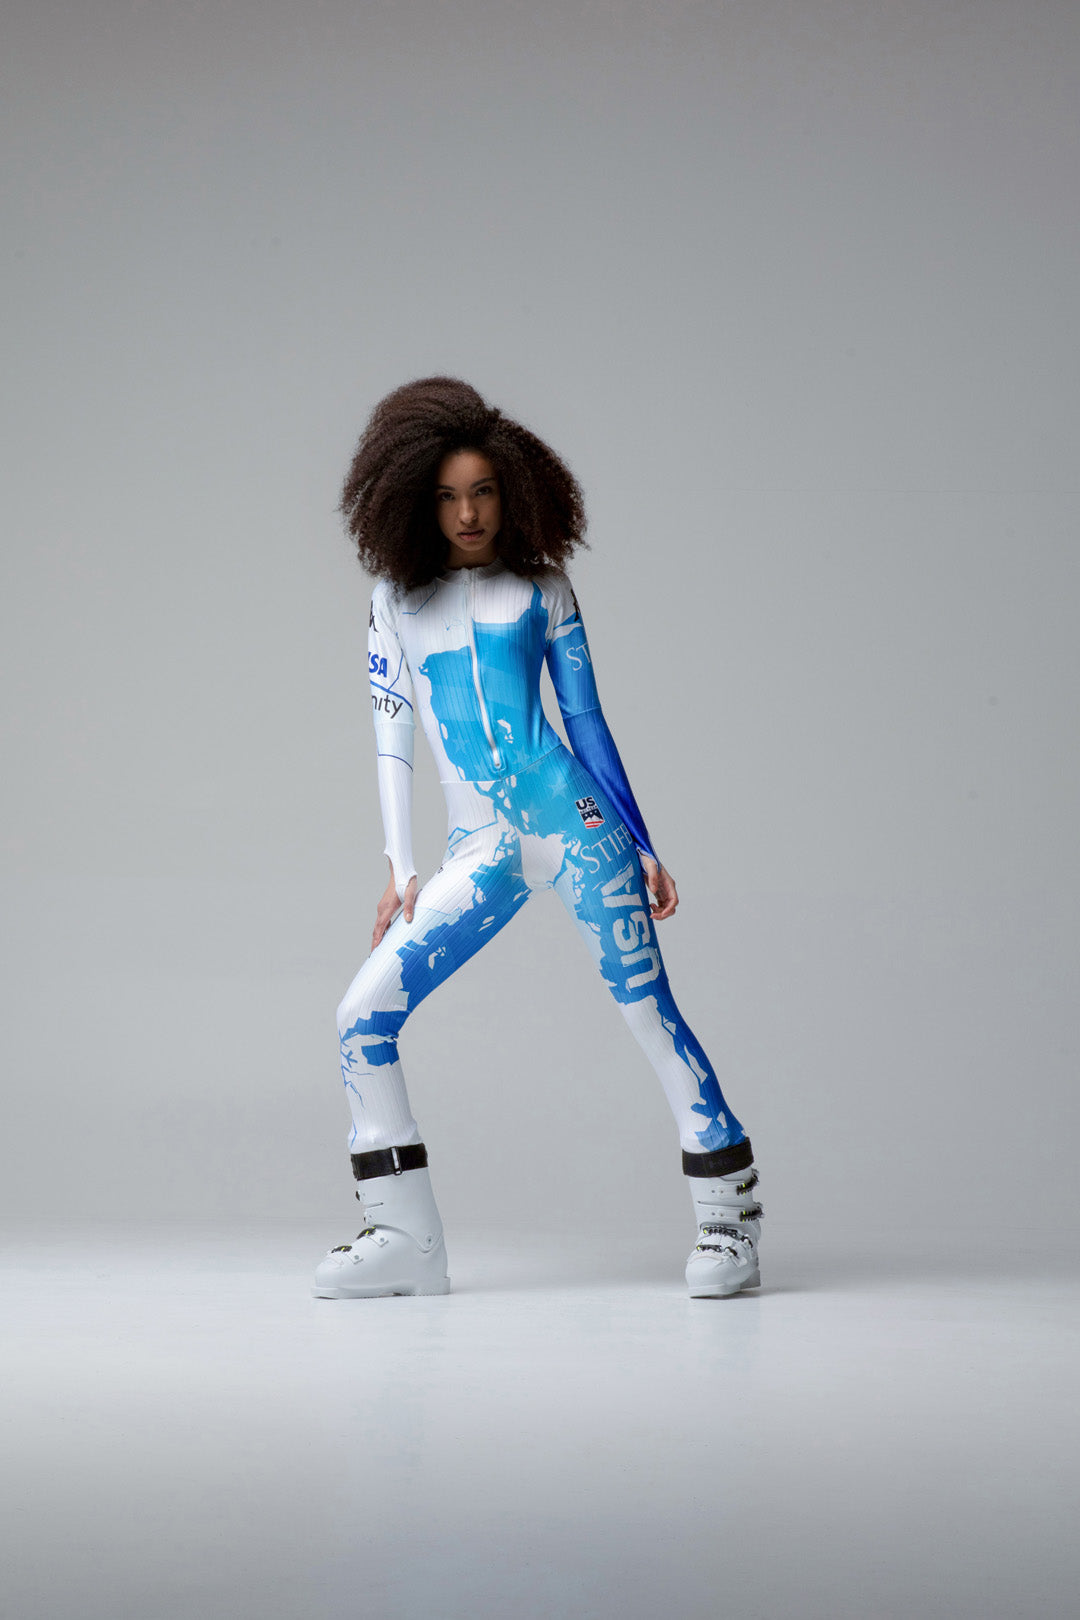 Female model wearing Kappa Protect Our Winter Collaboration Ski suit.